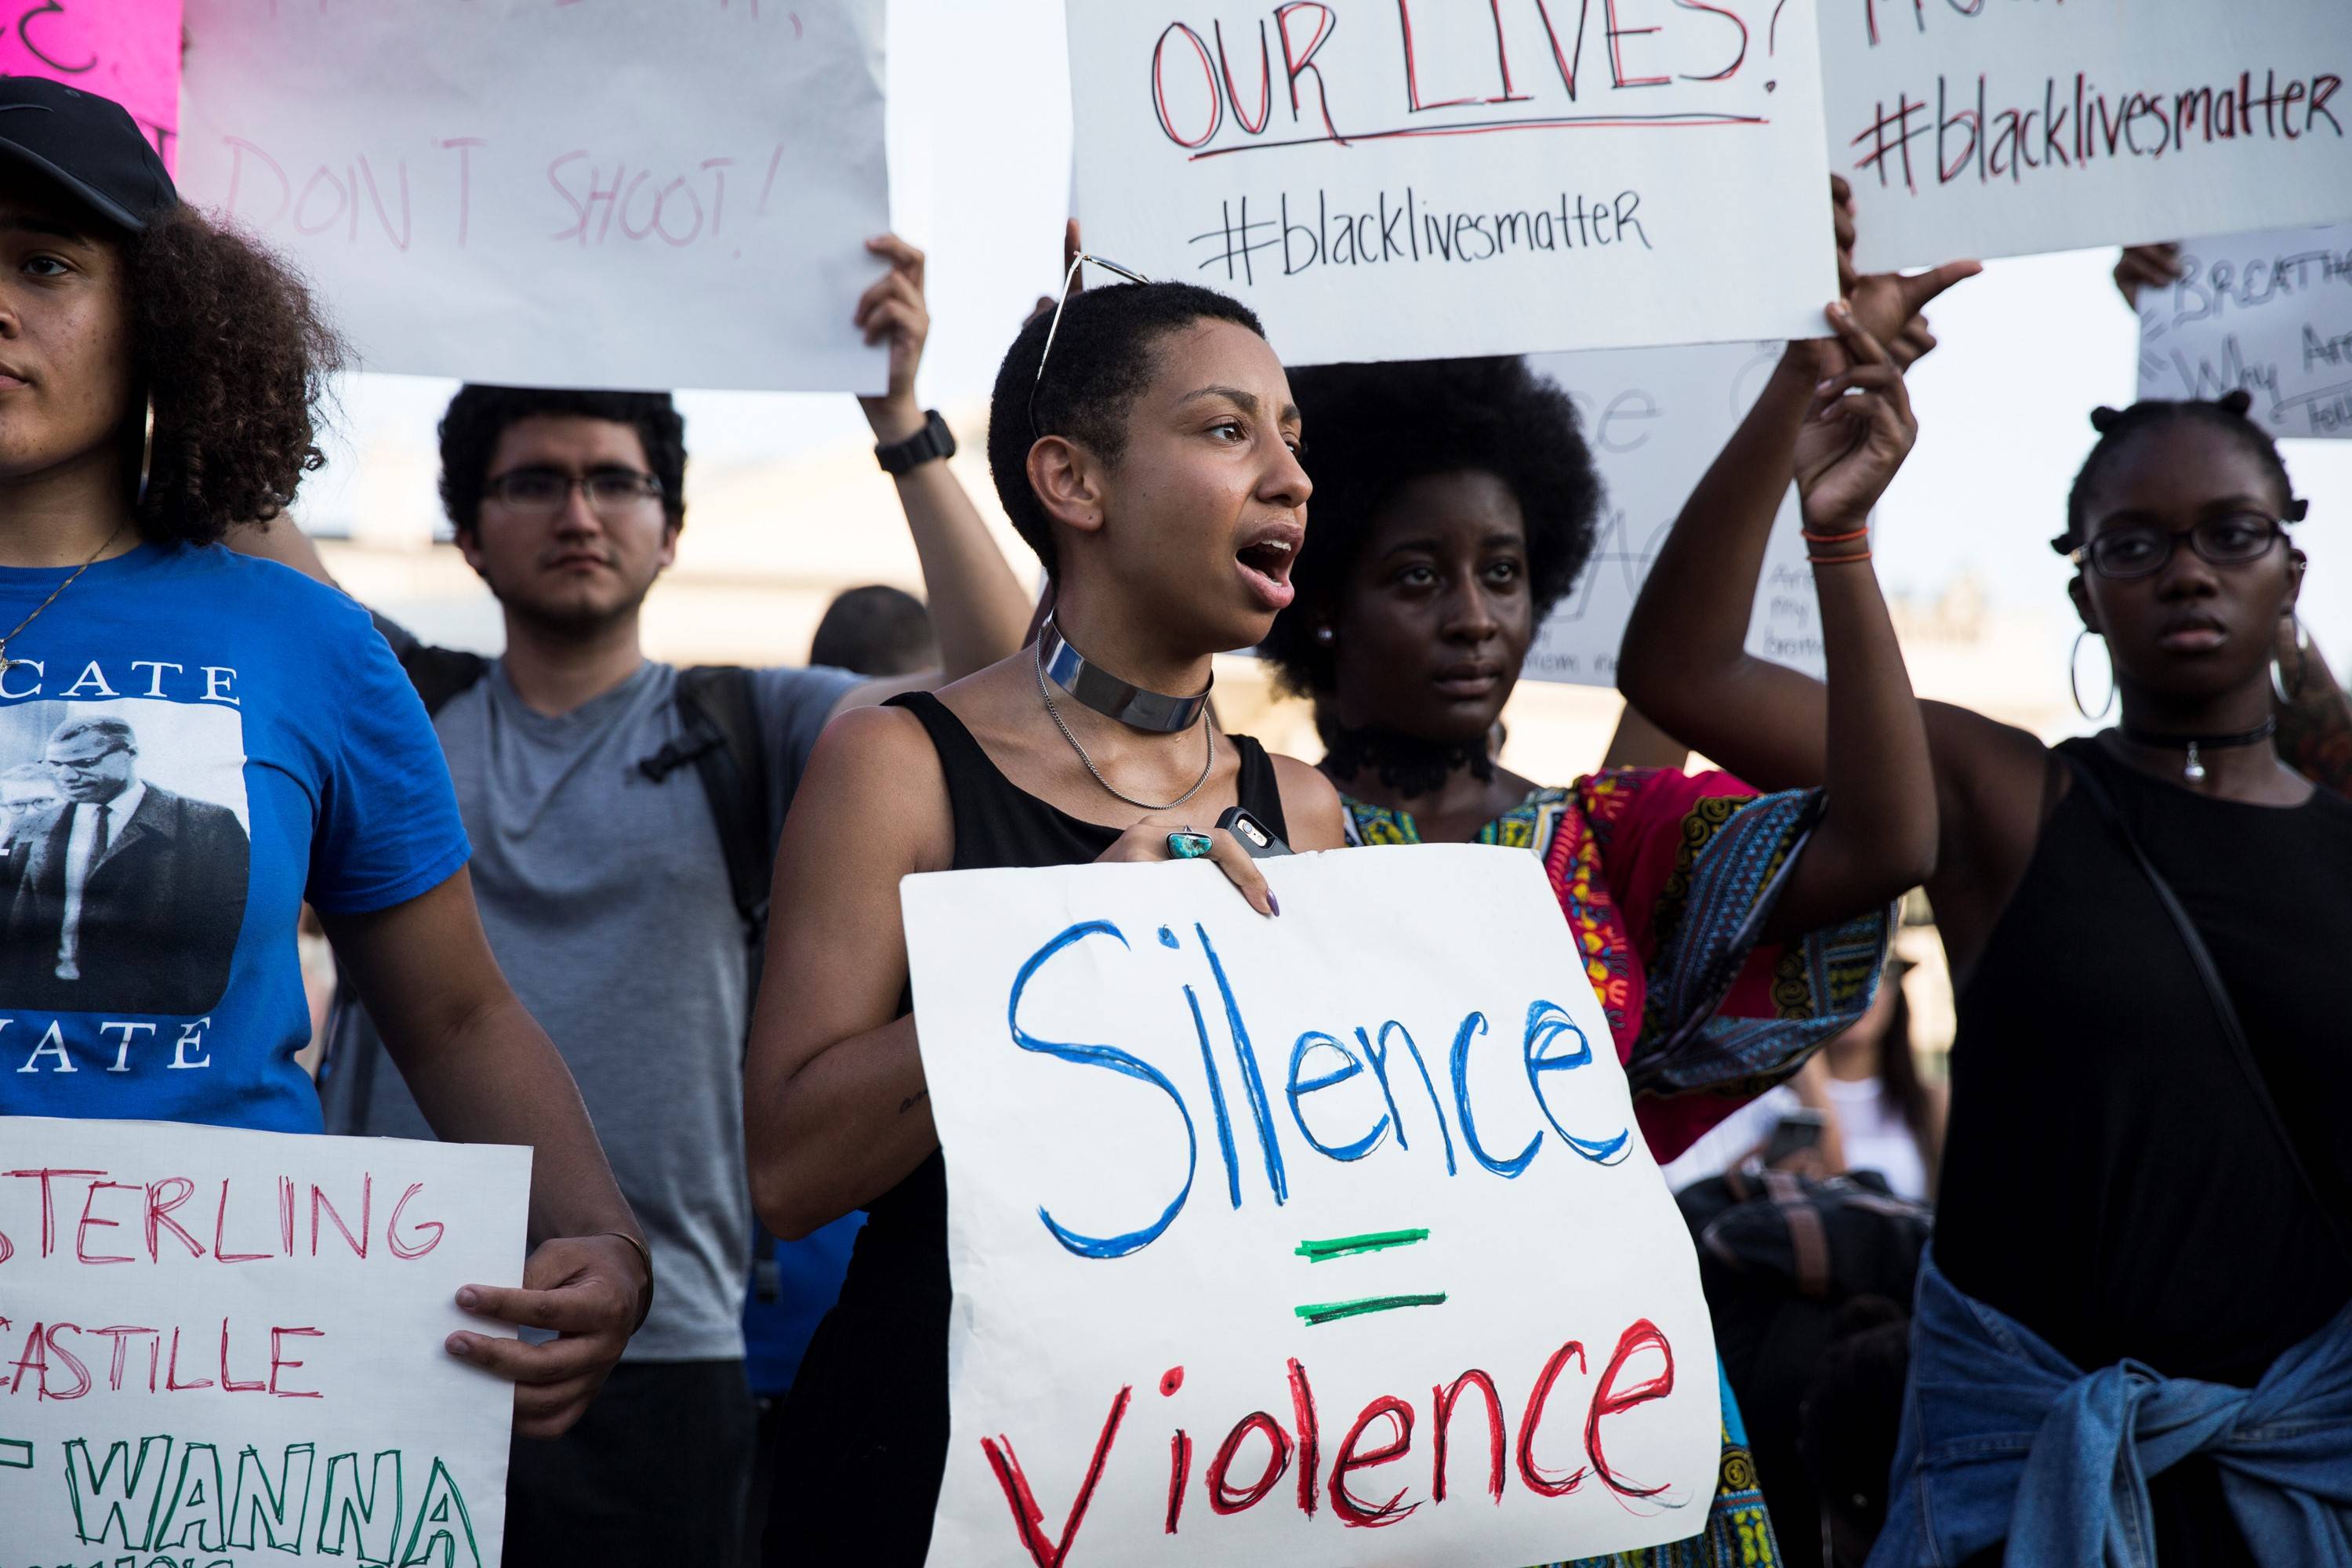 WASHINGTON, USA - JULY 8: Protestors march in front of the White House for Police Reform in Washington, USA on July 8, 2016. Tensions have been renewed after two black men, Philando Castile in Minnesota and Alton Sterling in Louisiana, were killed by Police. (Photo by Samuel Corum/Anadolu Agency/Getty Images)